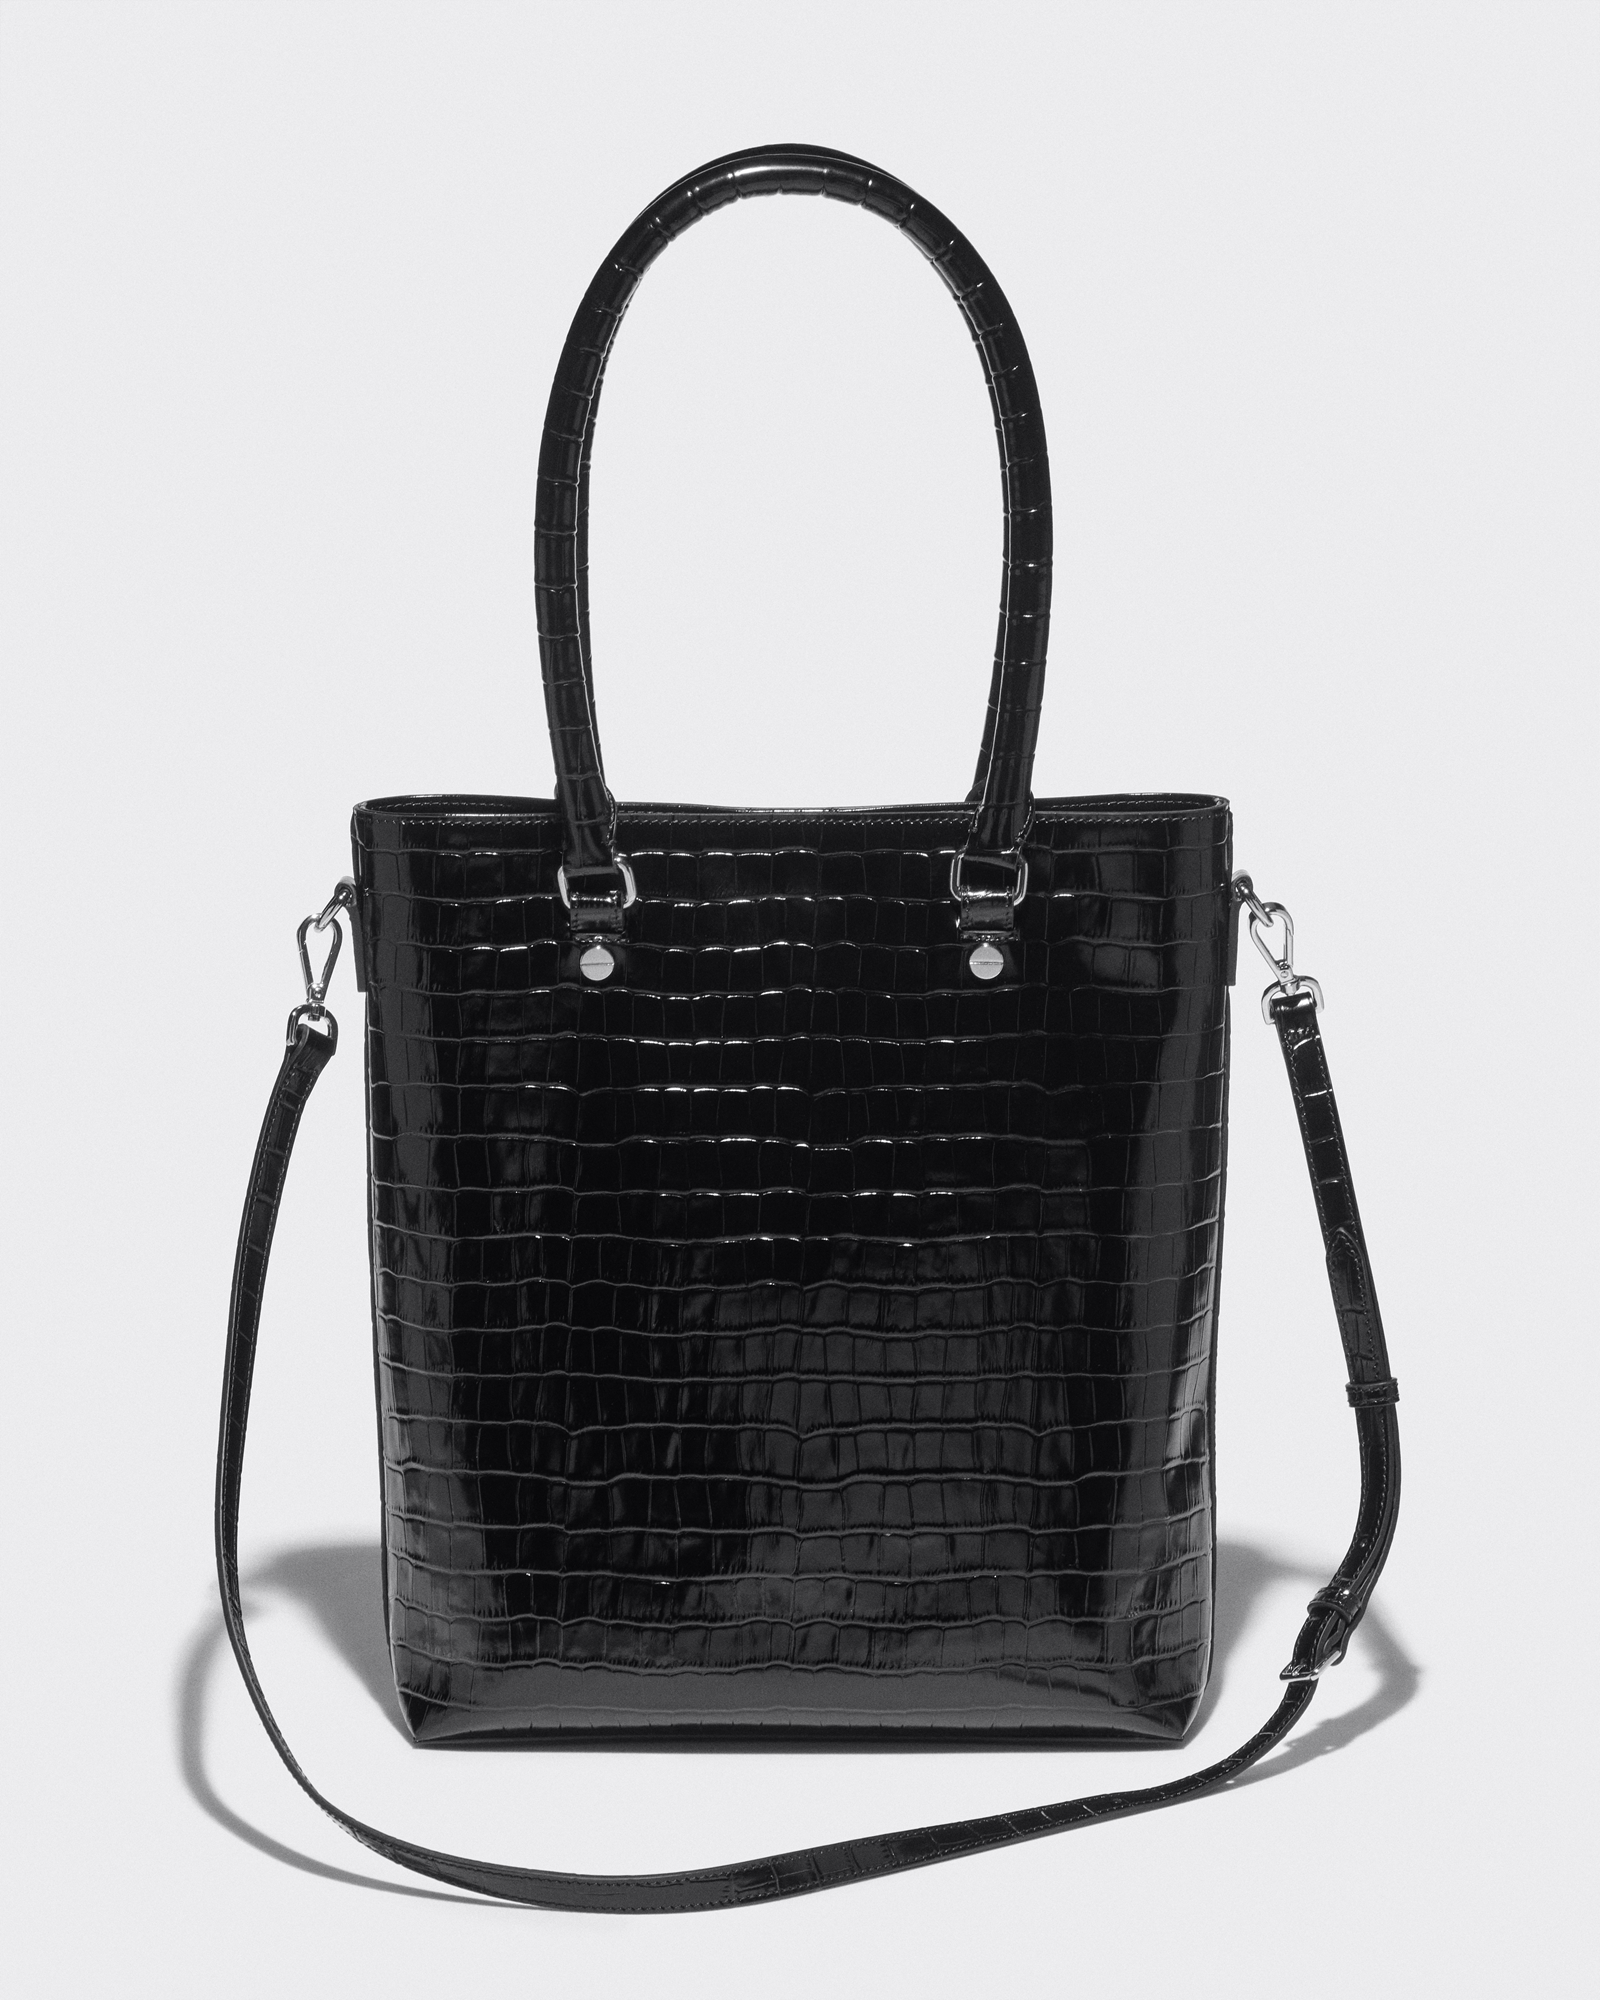 Accessories | Croc Embossed Leather Tote | 990 Black